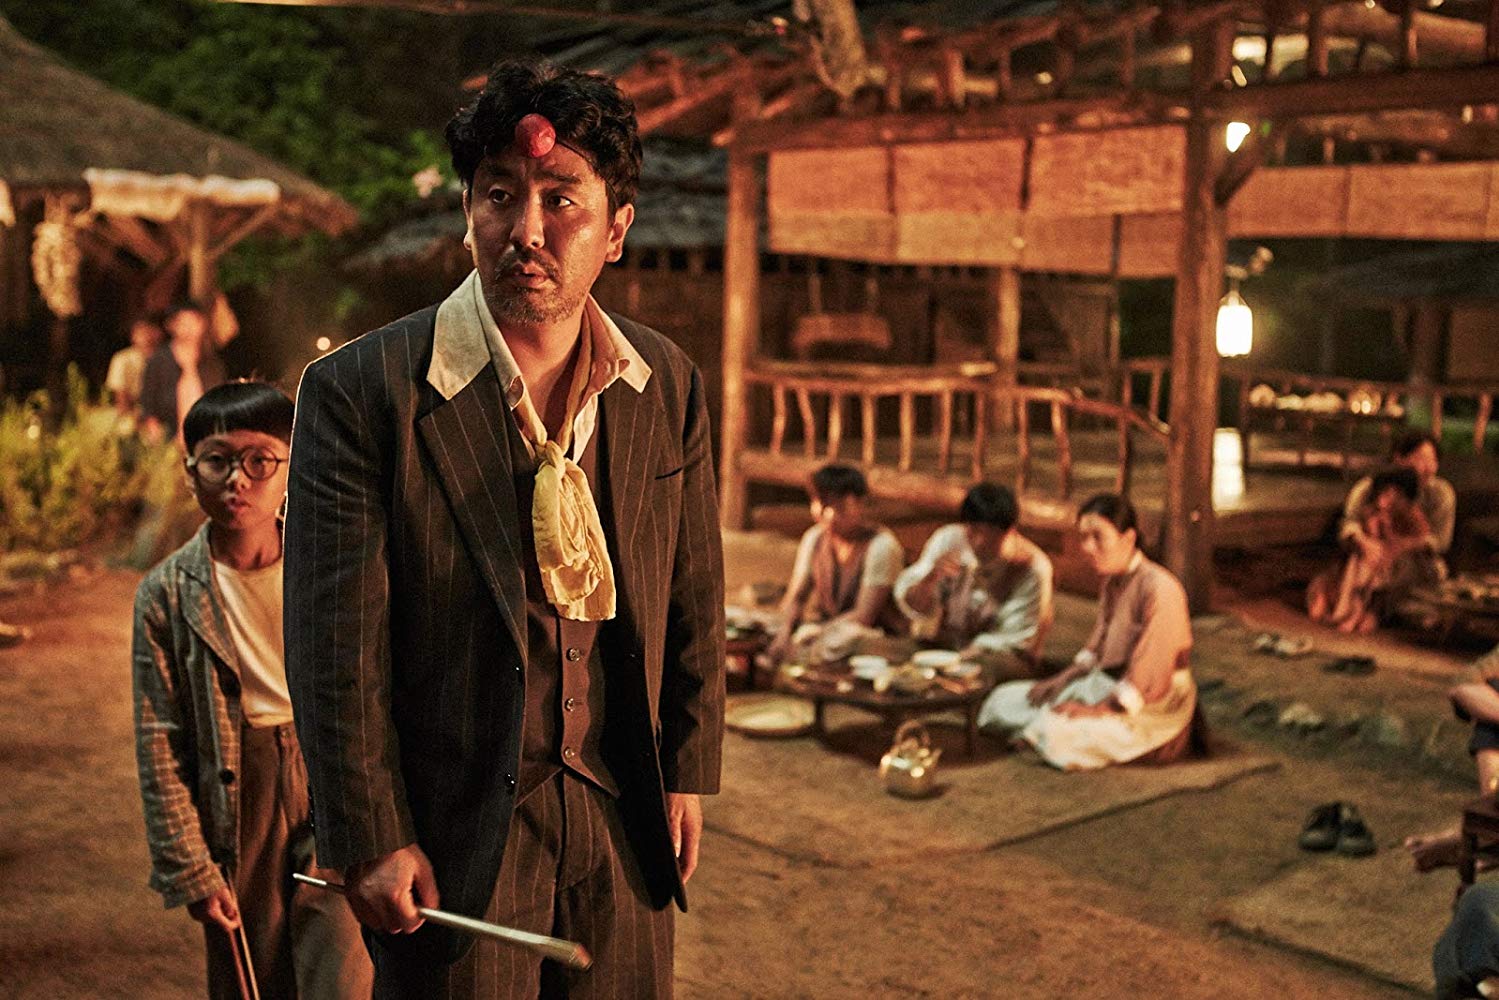 The Piper (Ryoo Seung-Ryong) and his son (Goo Seung-Hyeon) in The Piper (2015)